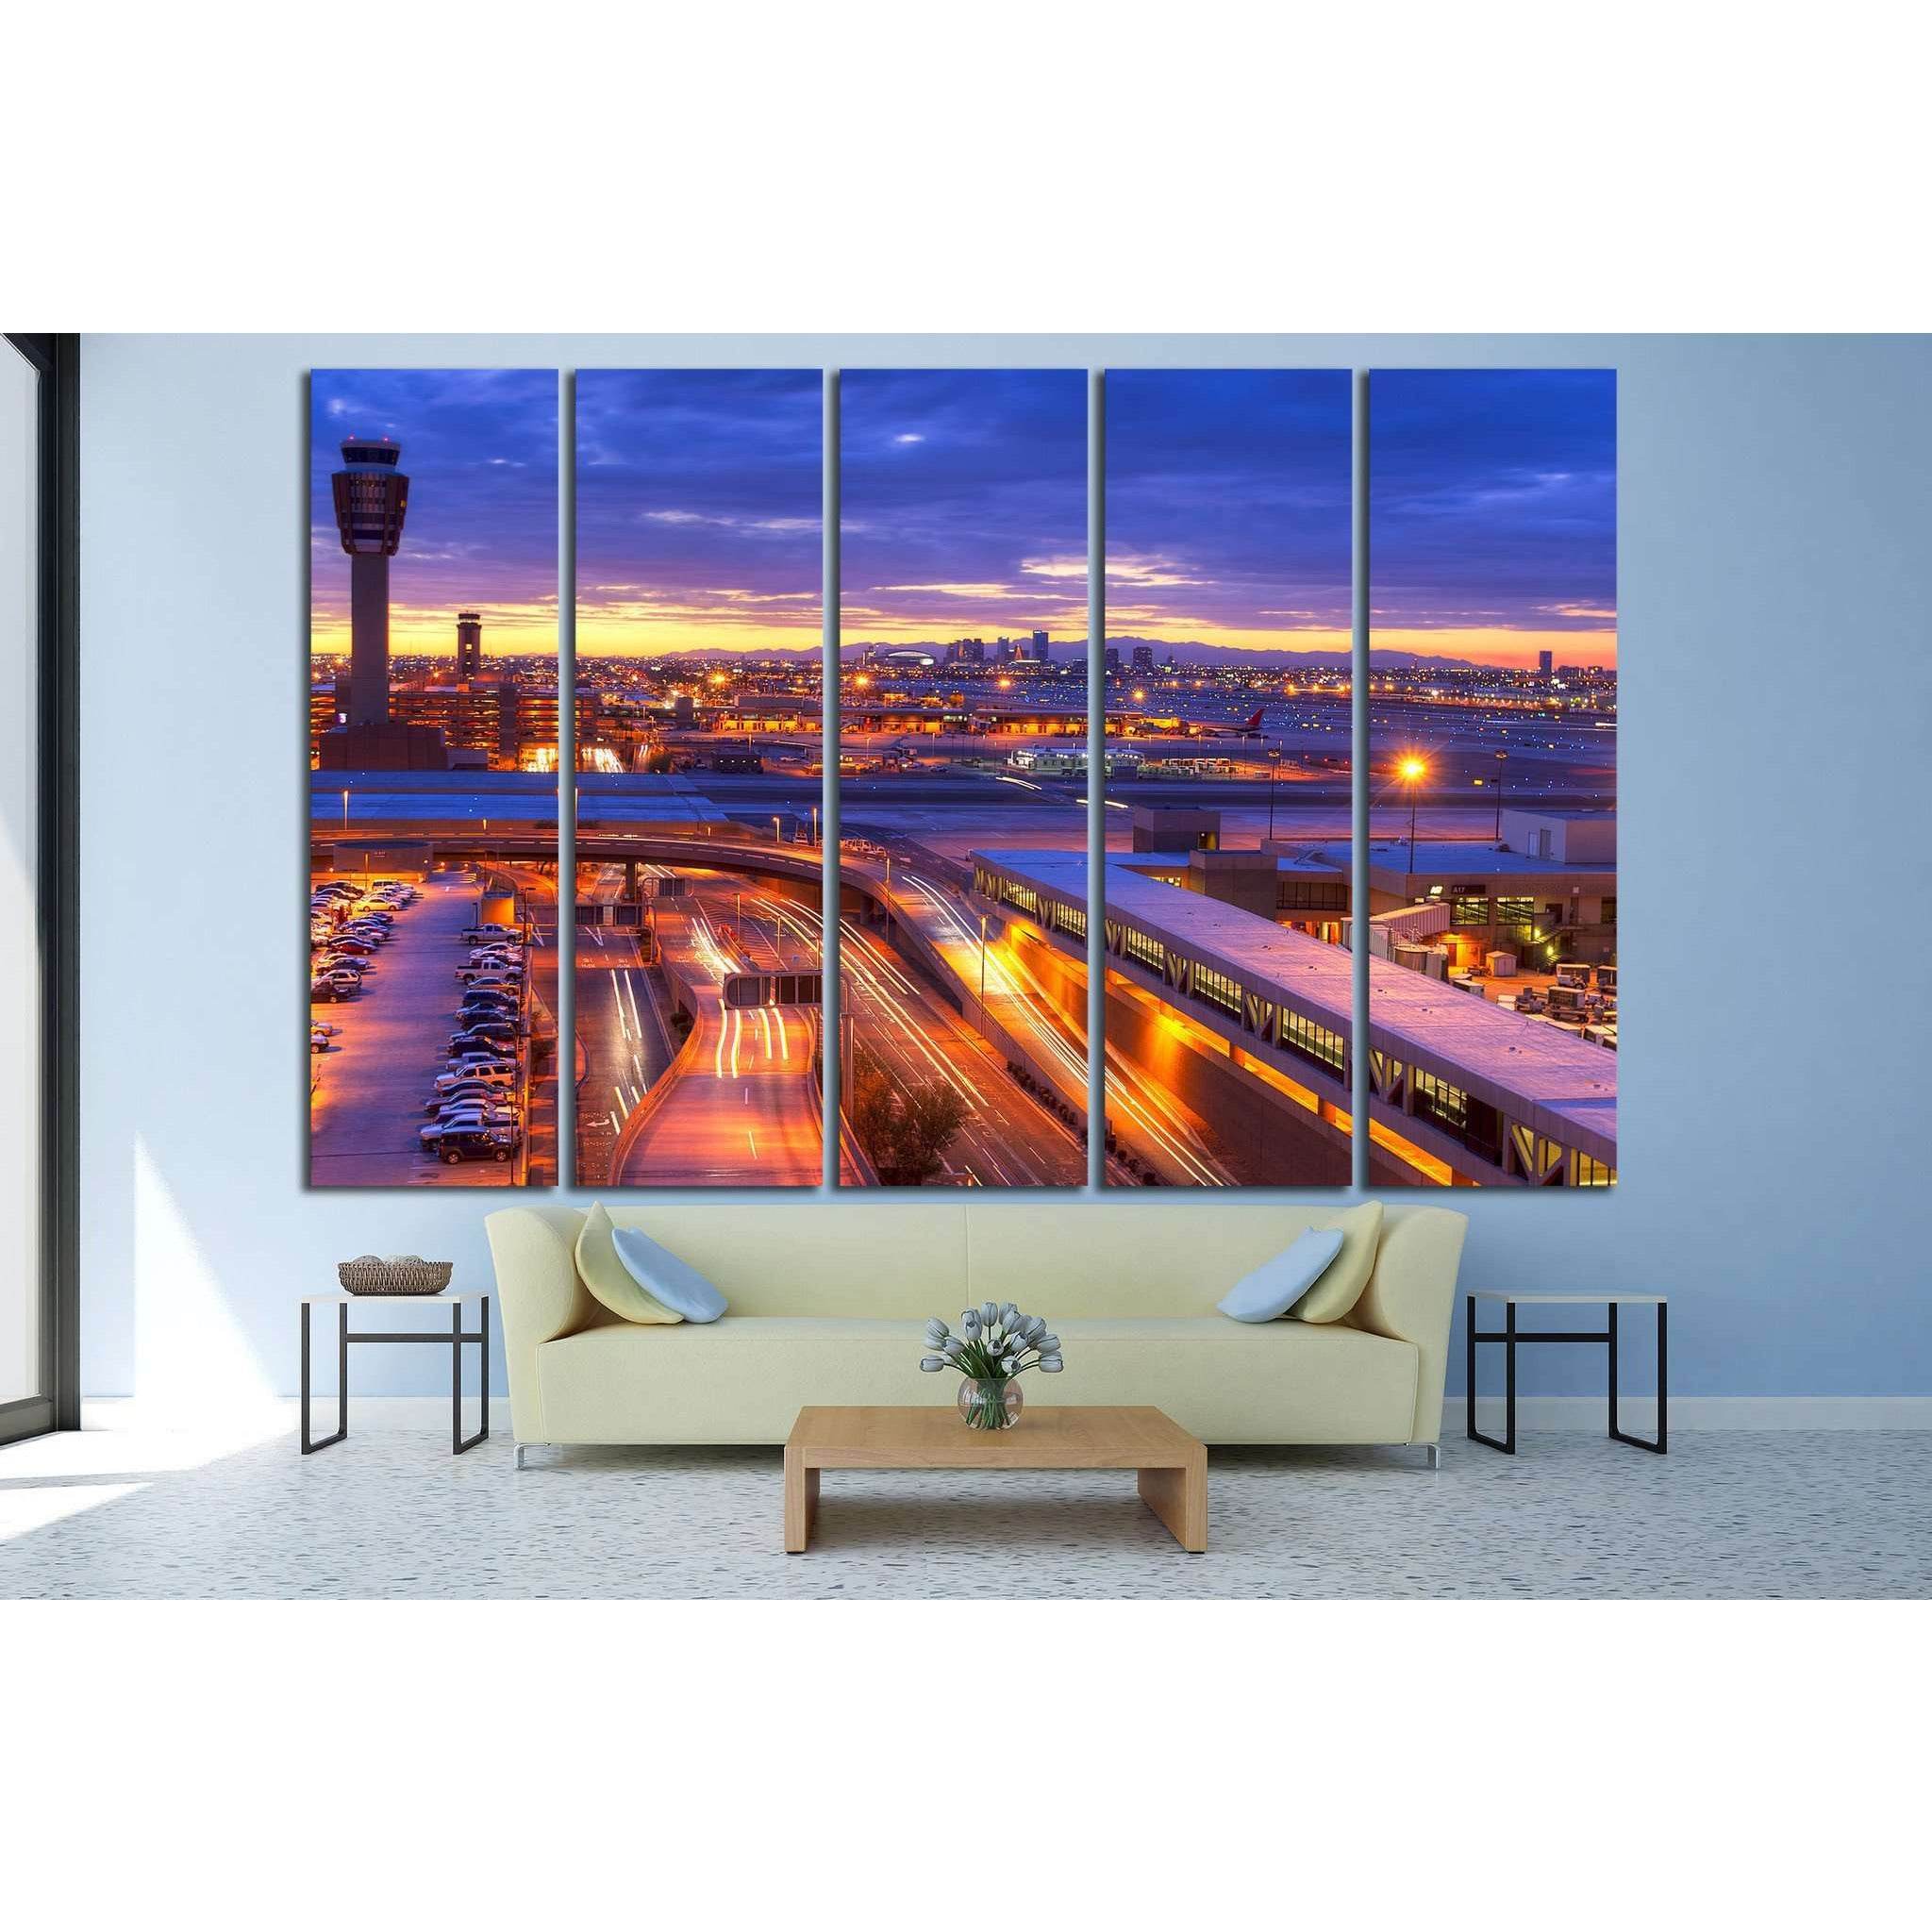 Phoenix airport №895 Ready to Hang Canvas Print